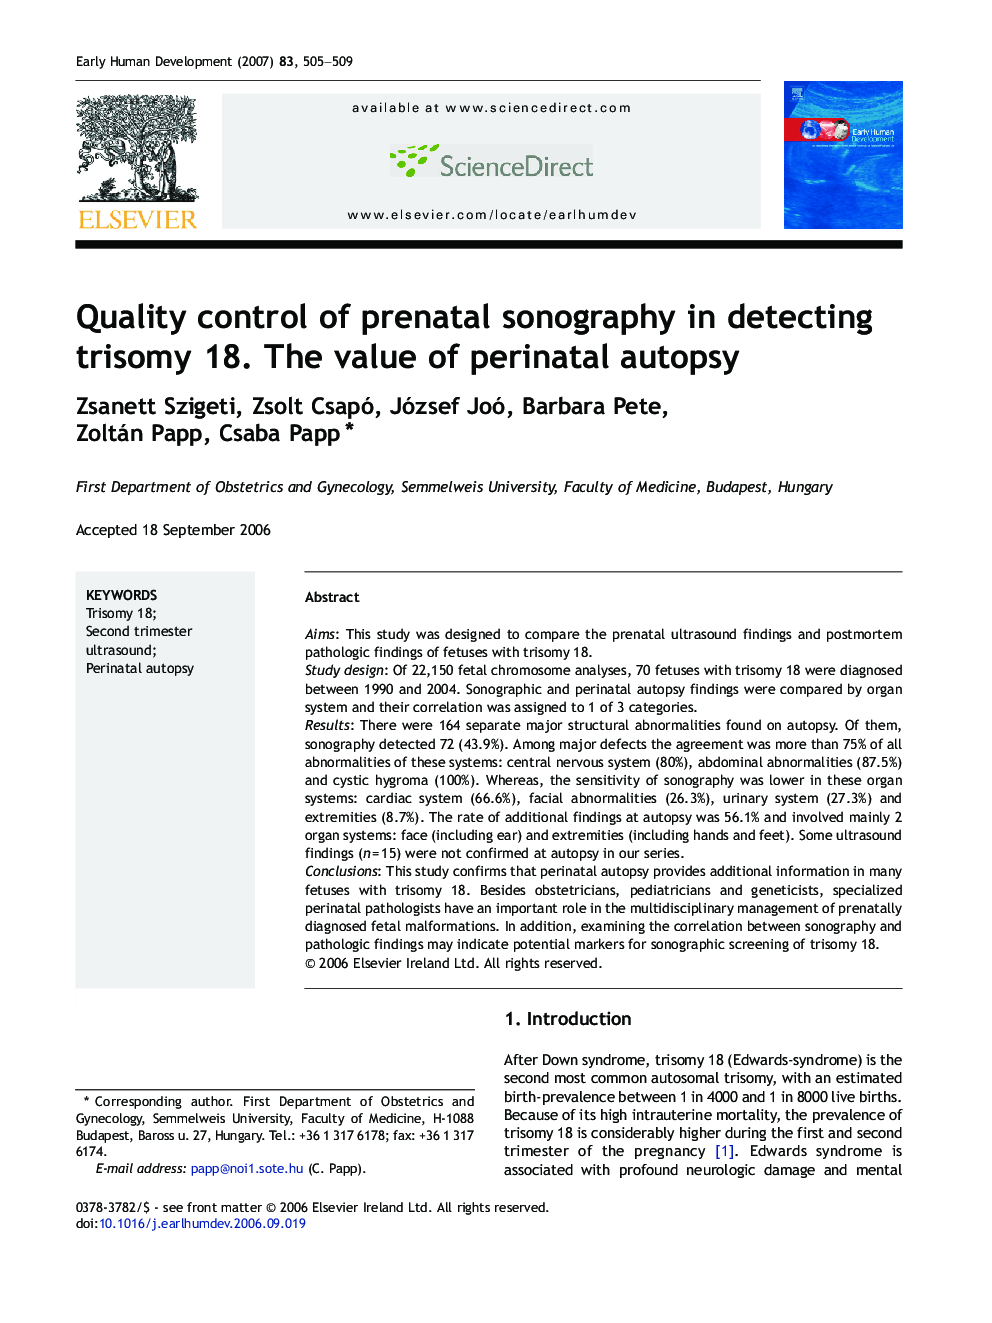 Quality control of prenatal sonography in detecting trisomy 18. The value of perinatal autopsy